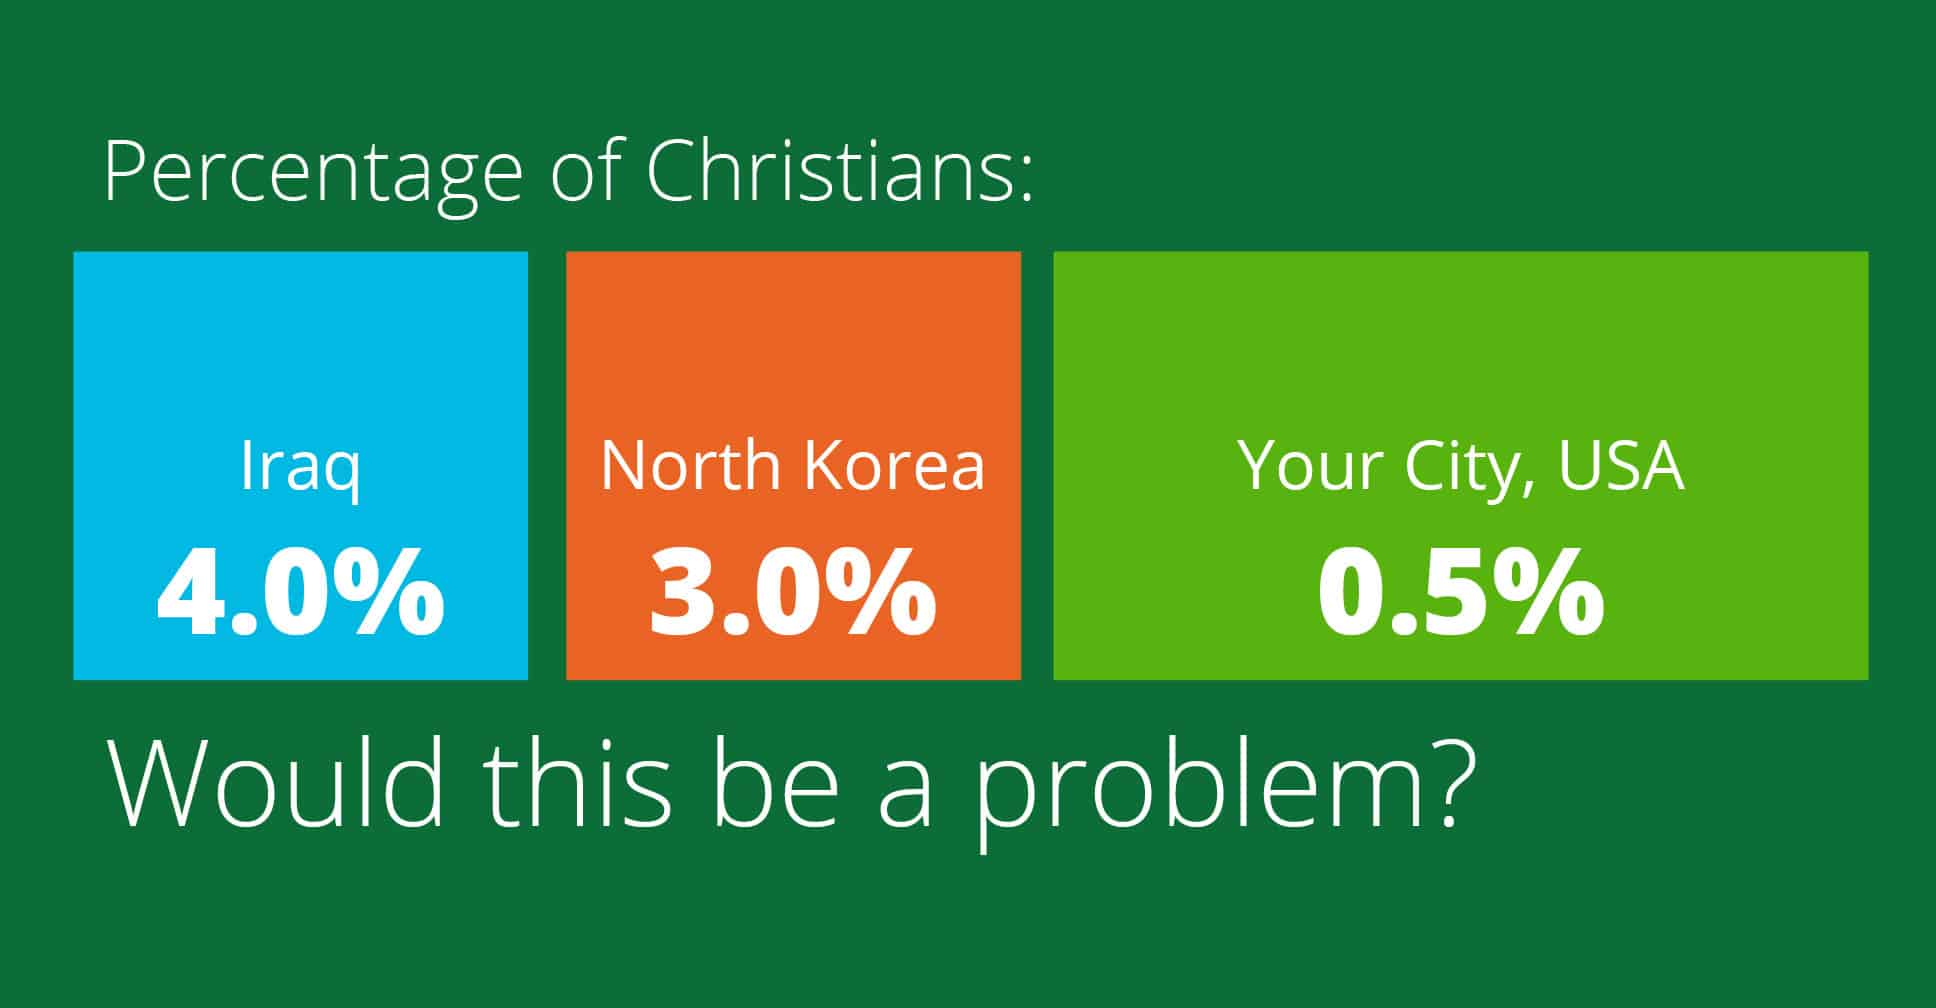 What if your city had a lower percentage of Christians than North Korea?